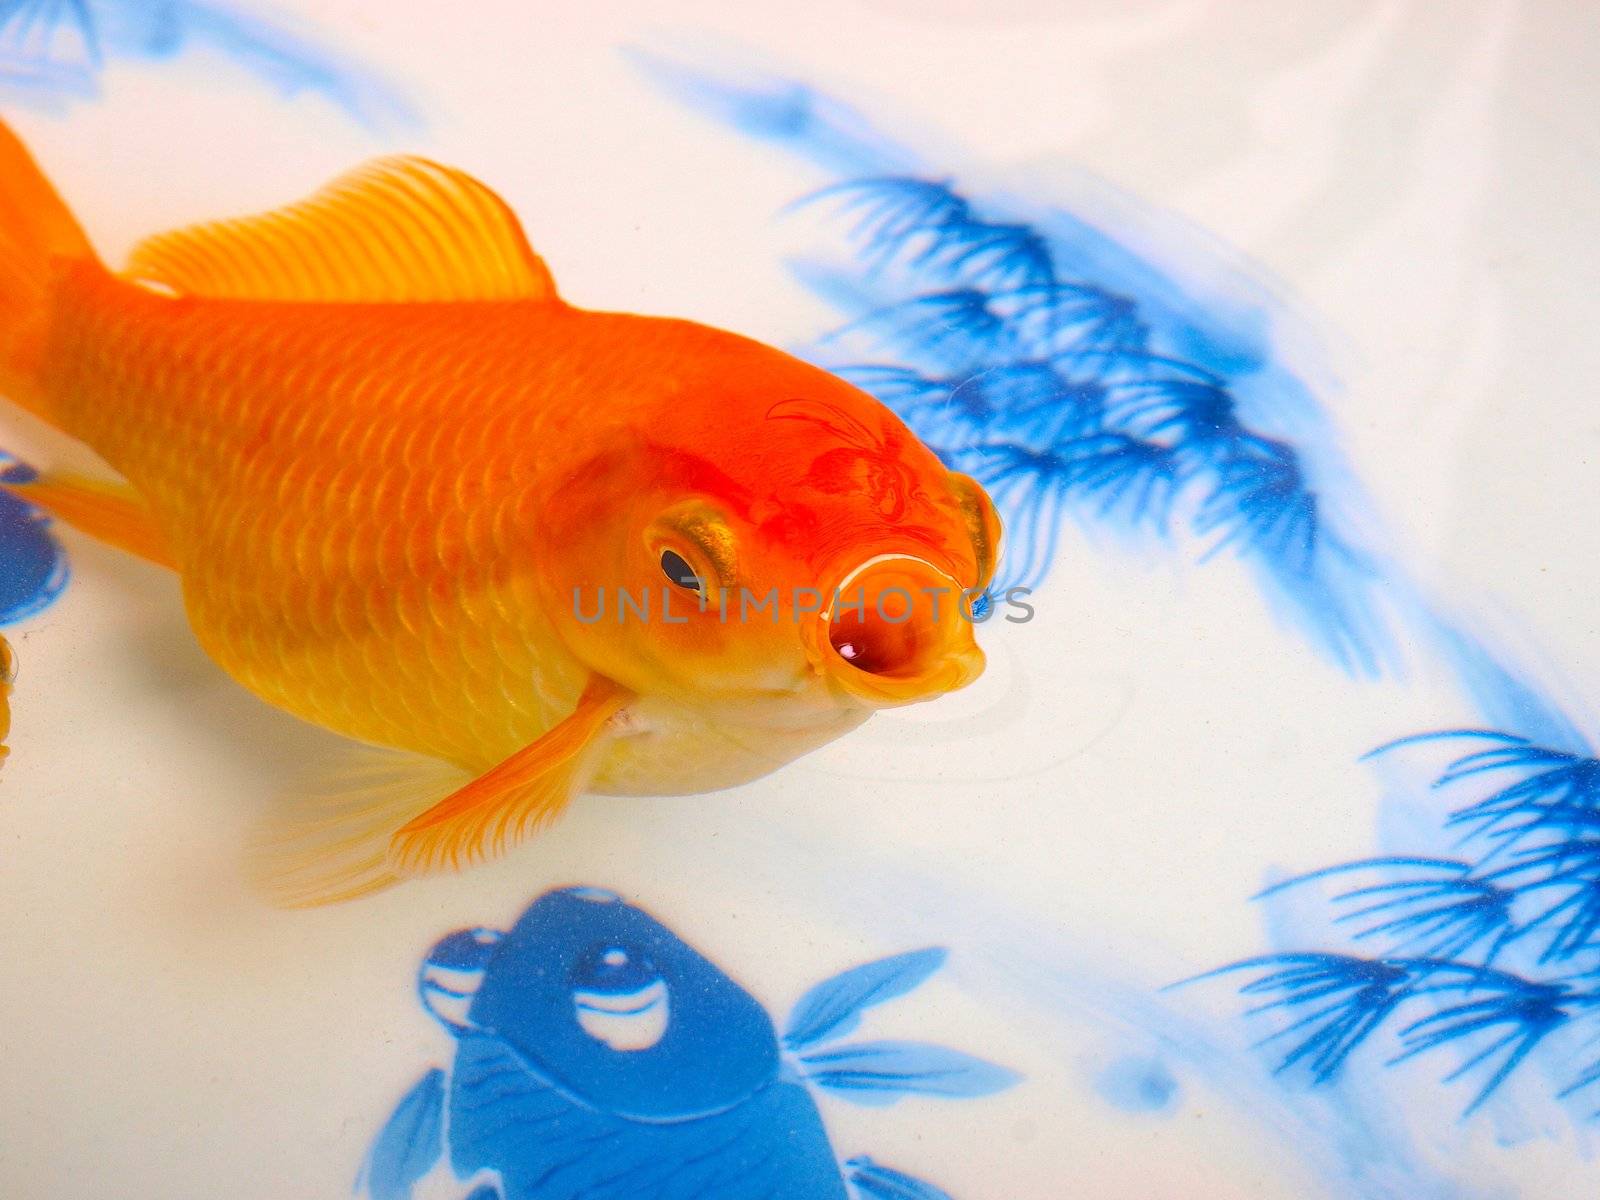 Goldfish in a Chinese ceramic bowl by dotweb